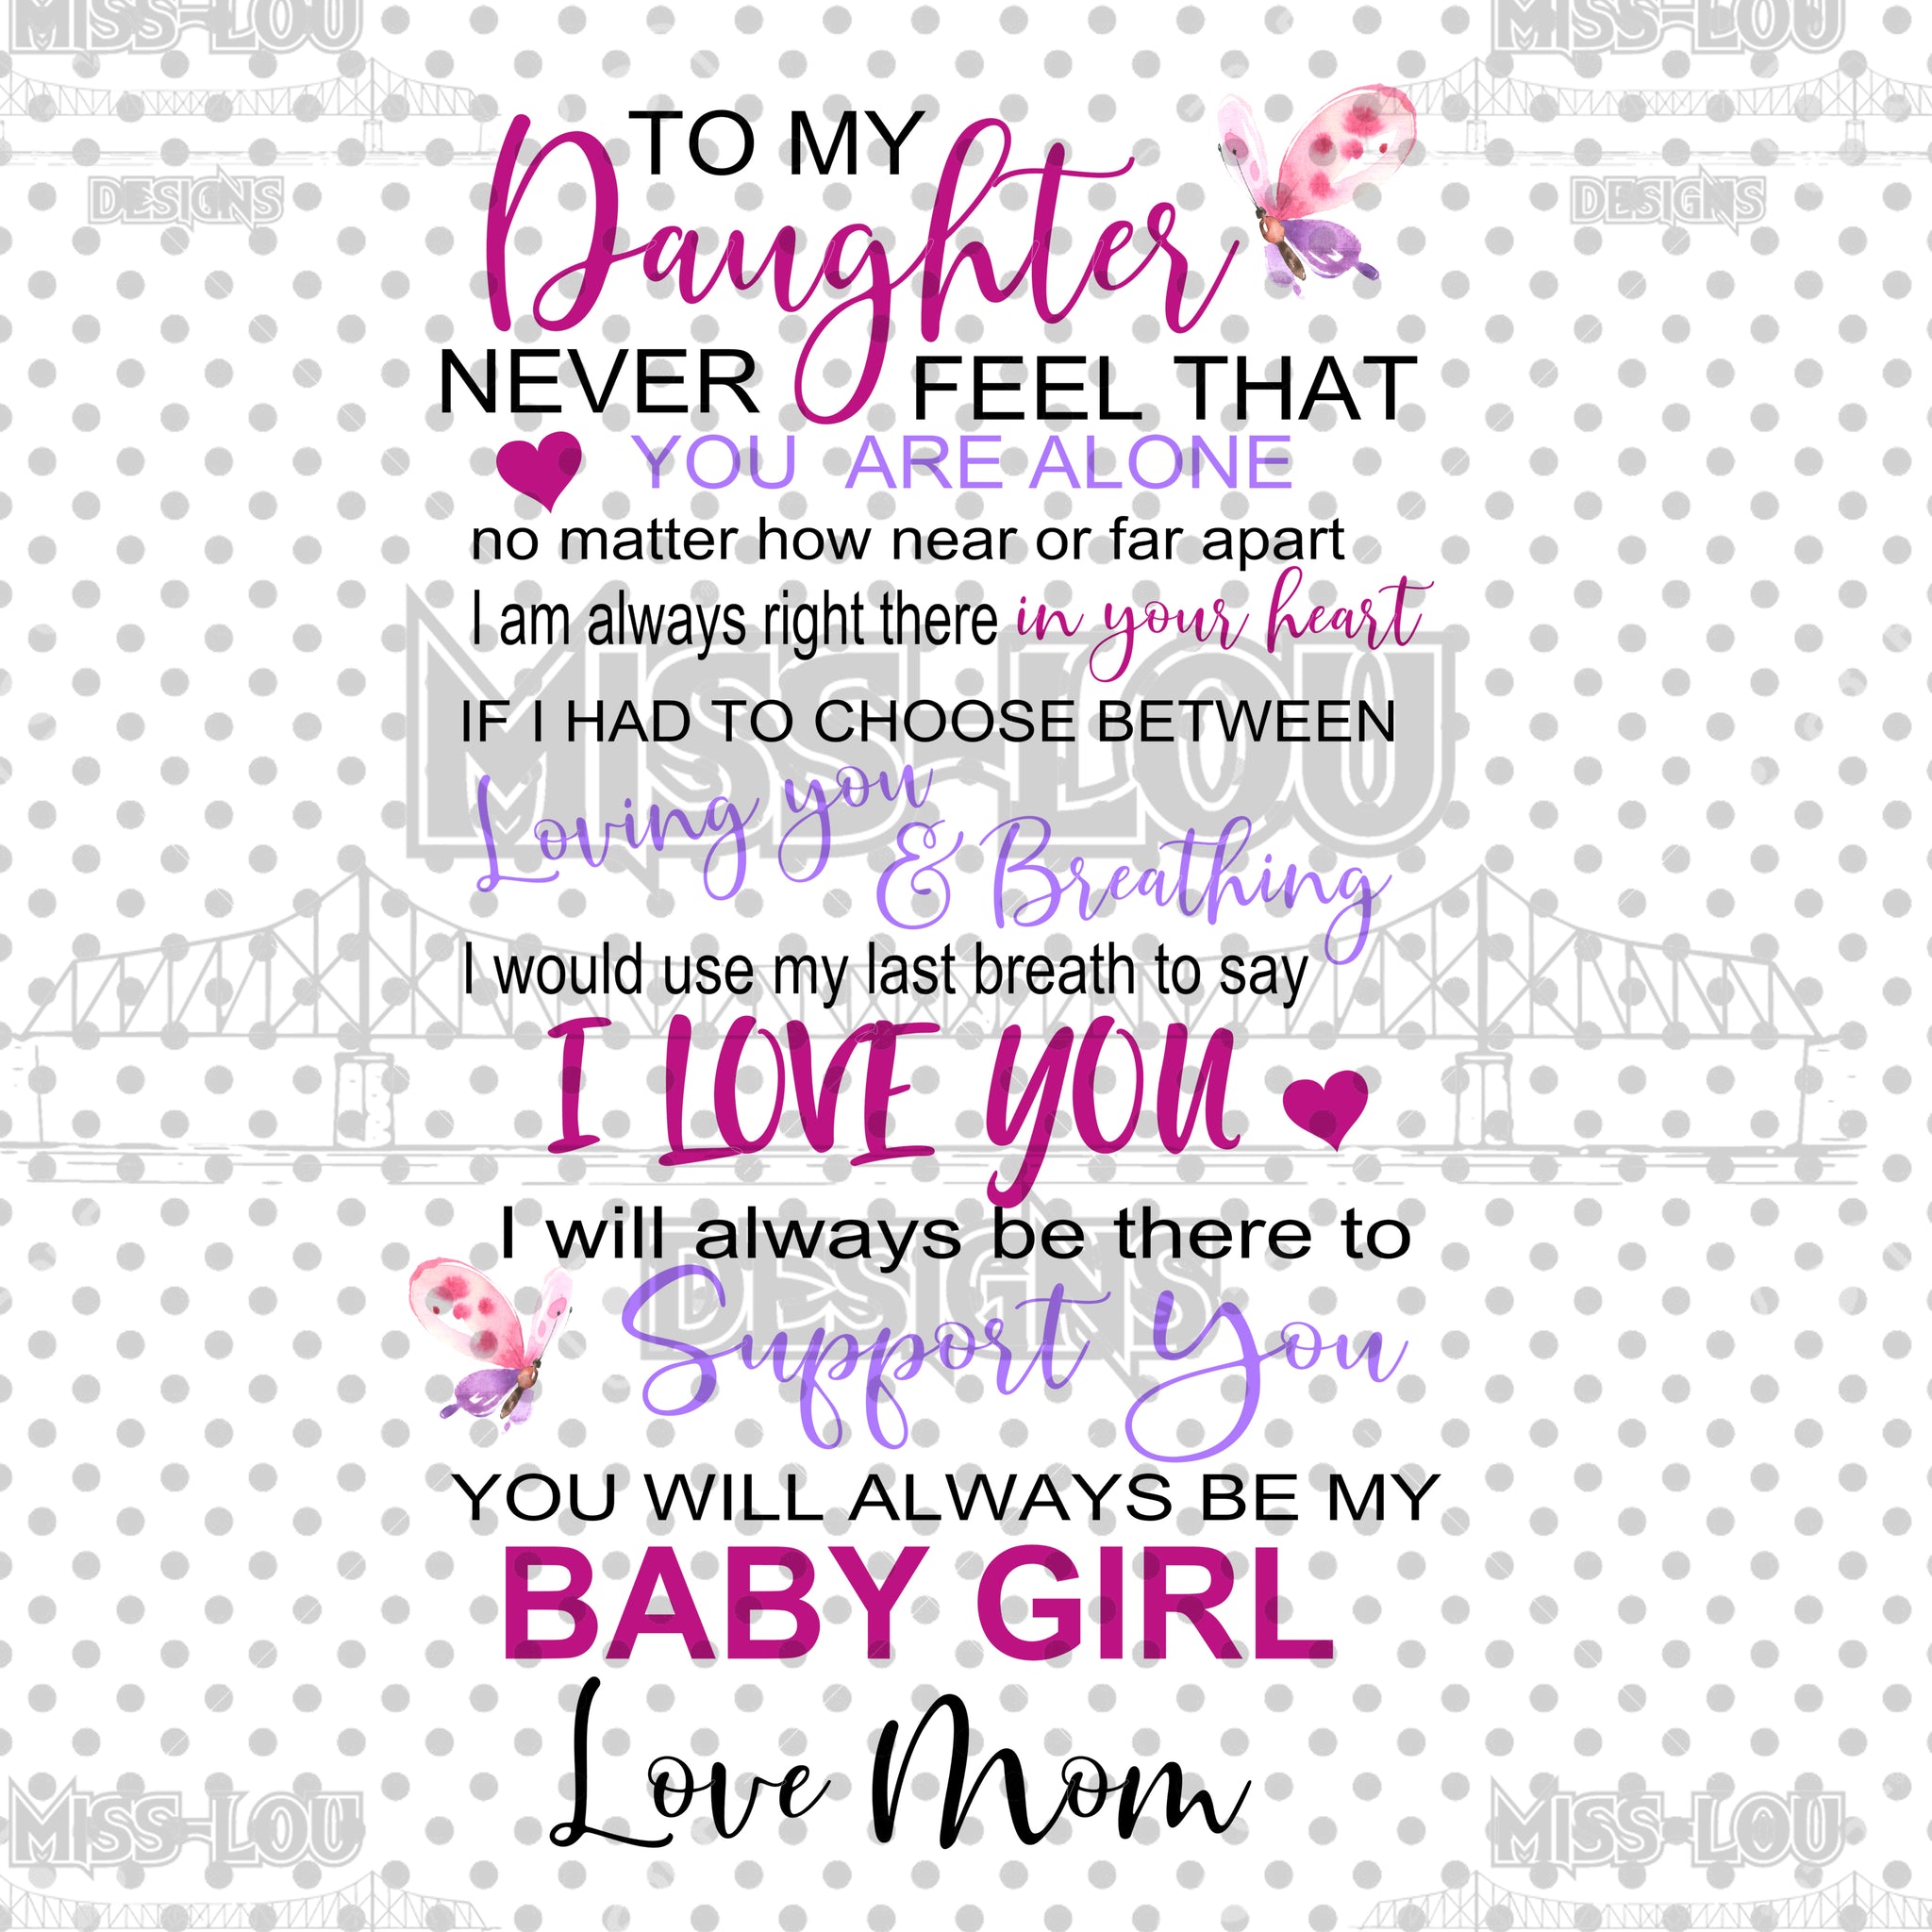 To My Daughter Never Feel Alone Pink Digital Download Miss Lou Designs More